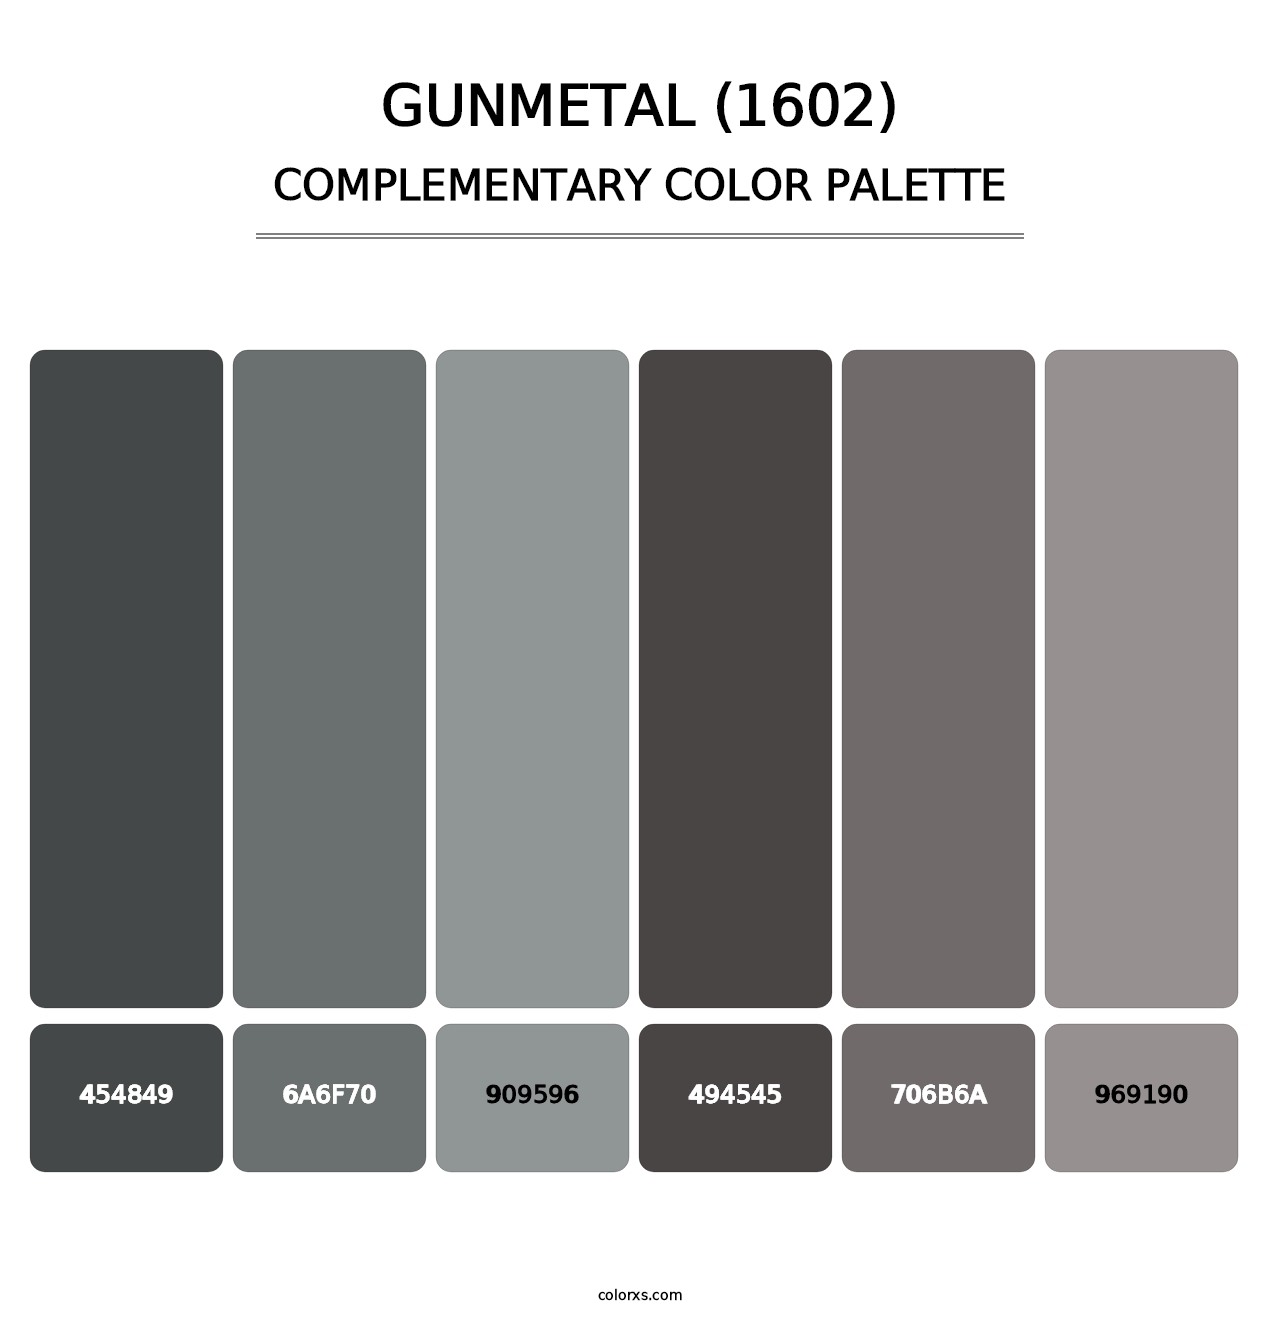 Gunmetal (1602) - Complementary Color Palette